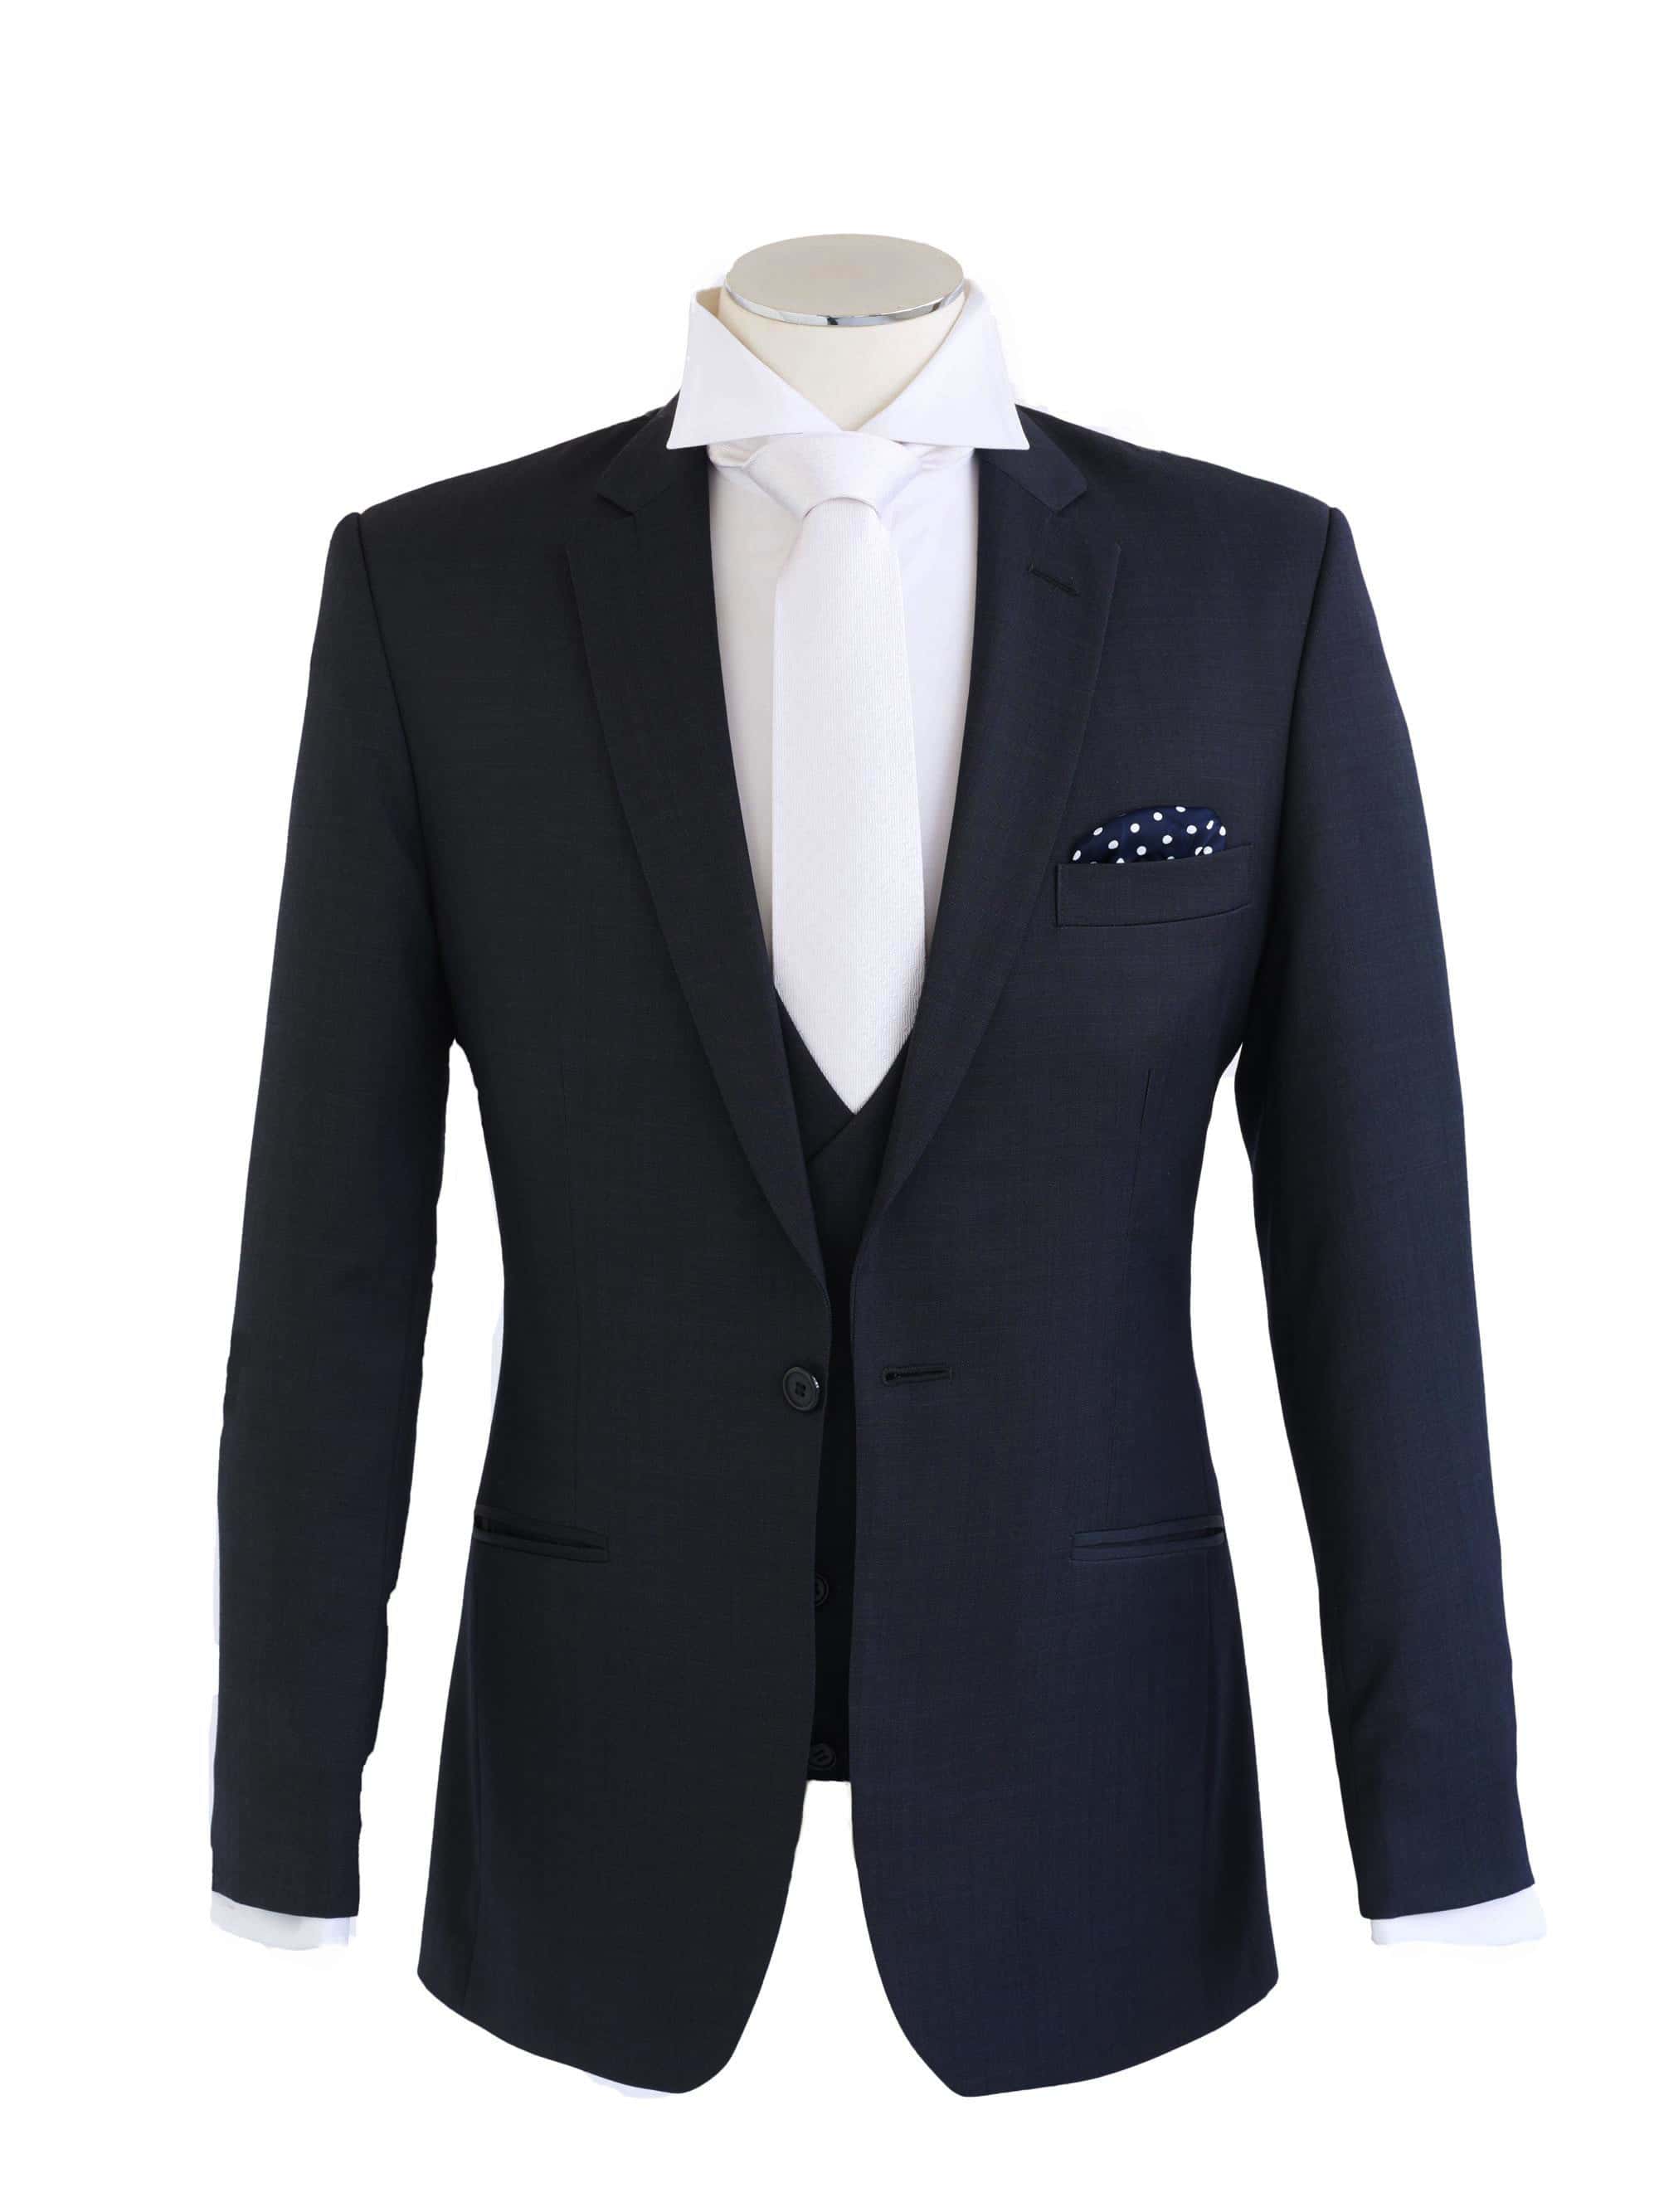 Day Suits | Peppers Formal Wear | Men’s Tailored Suits Sydney